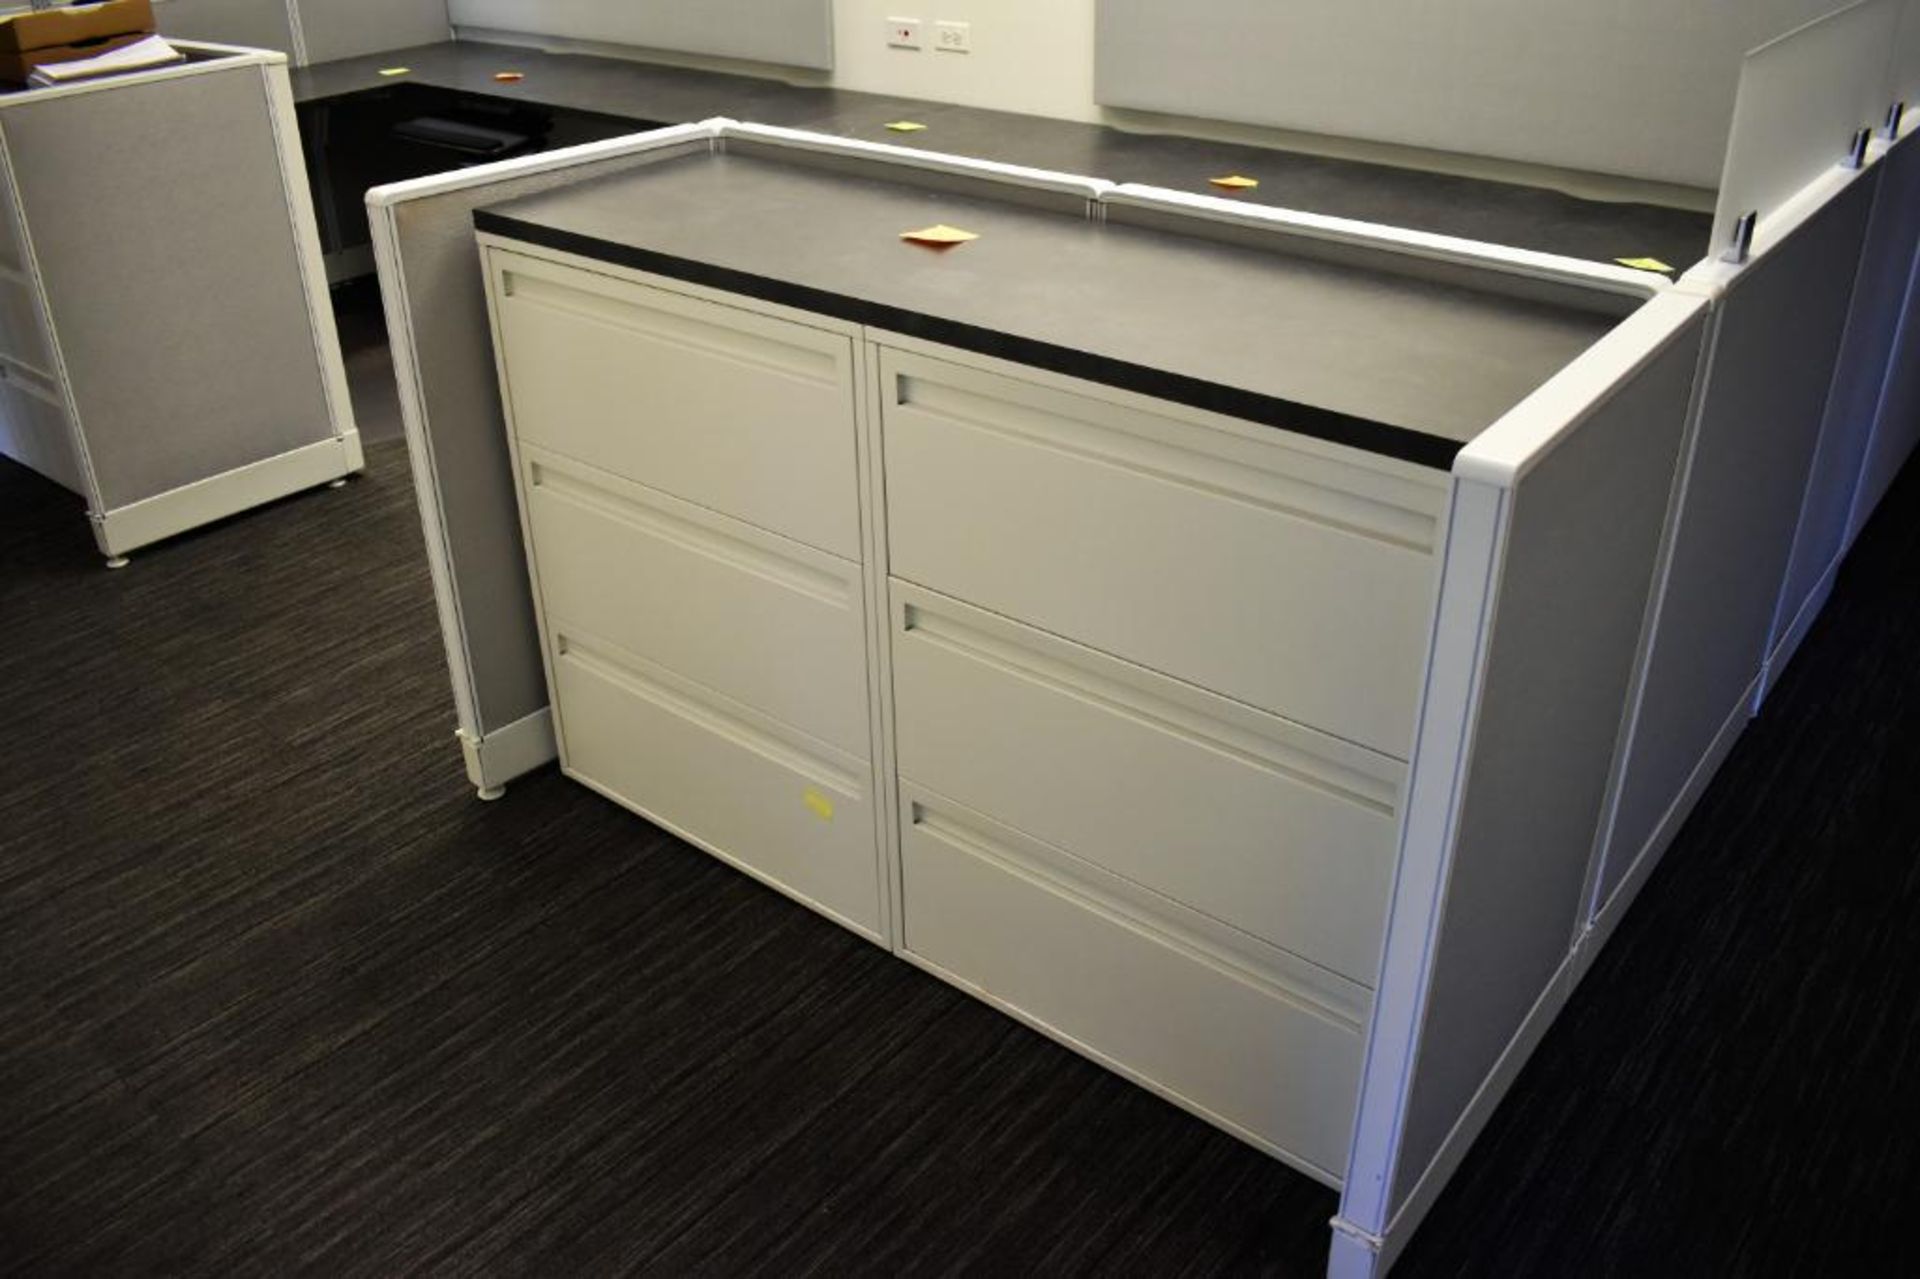 (2) Metal Four Drawer Lateral Sized File Cabinets, 5' (est) Wood Laminate Work Top, Metal Frame Clot